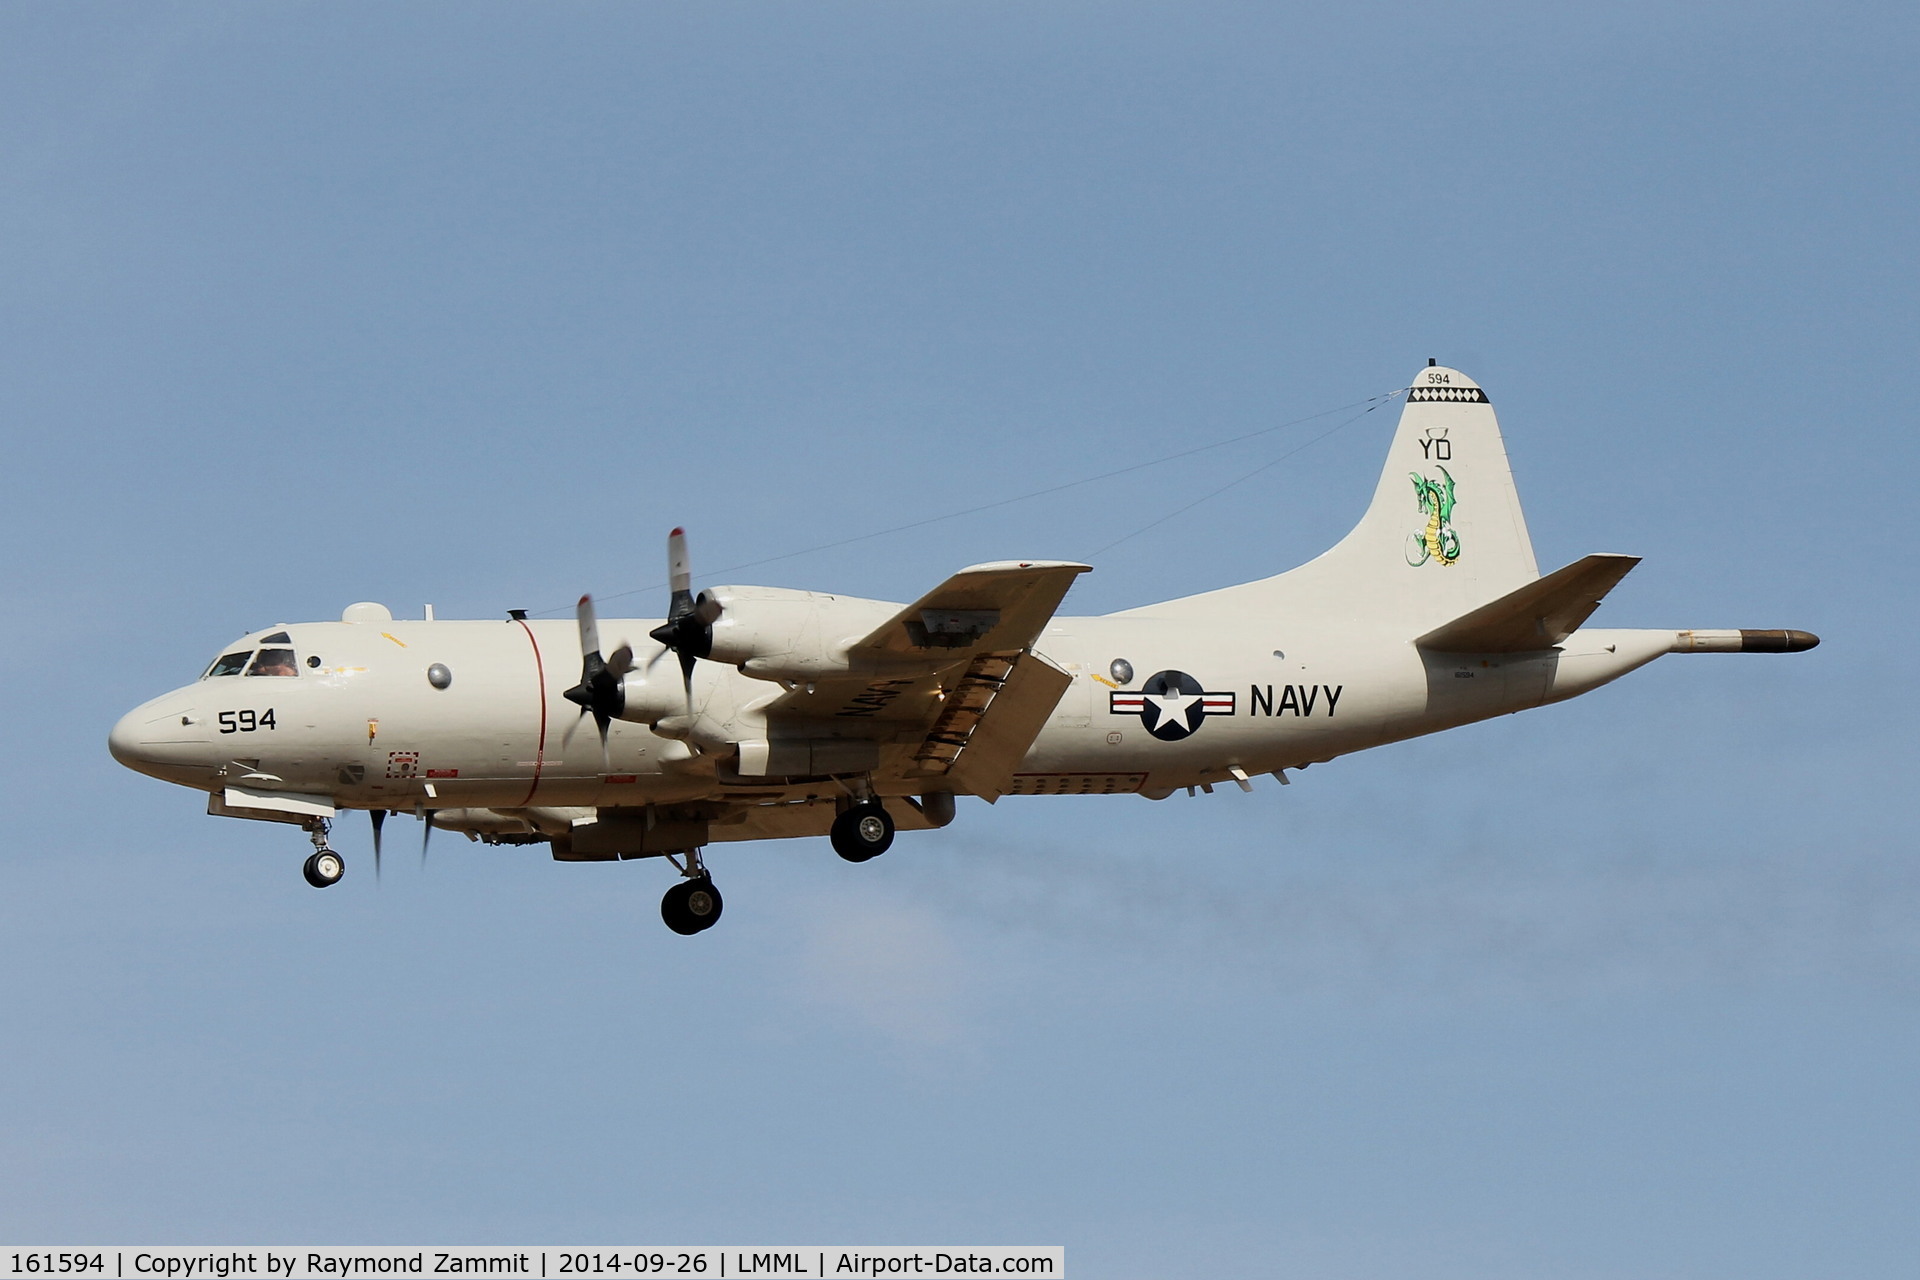 161594, 1984 Lockheed P-3C Orion C/N 285E-5768, Lockheed P-3C Orion 161594/YD from United States Navy